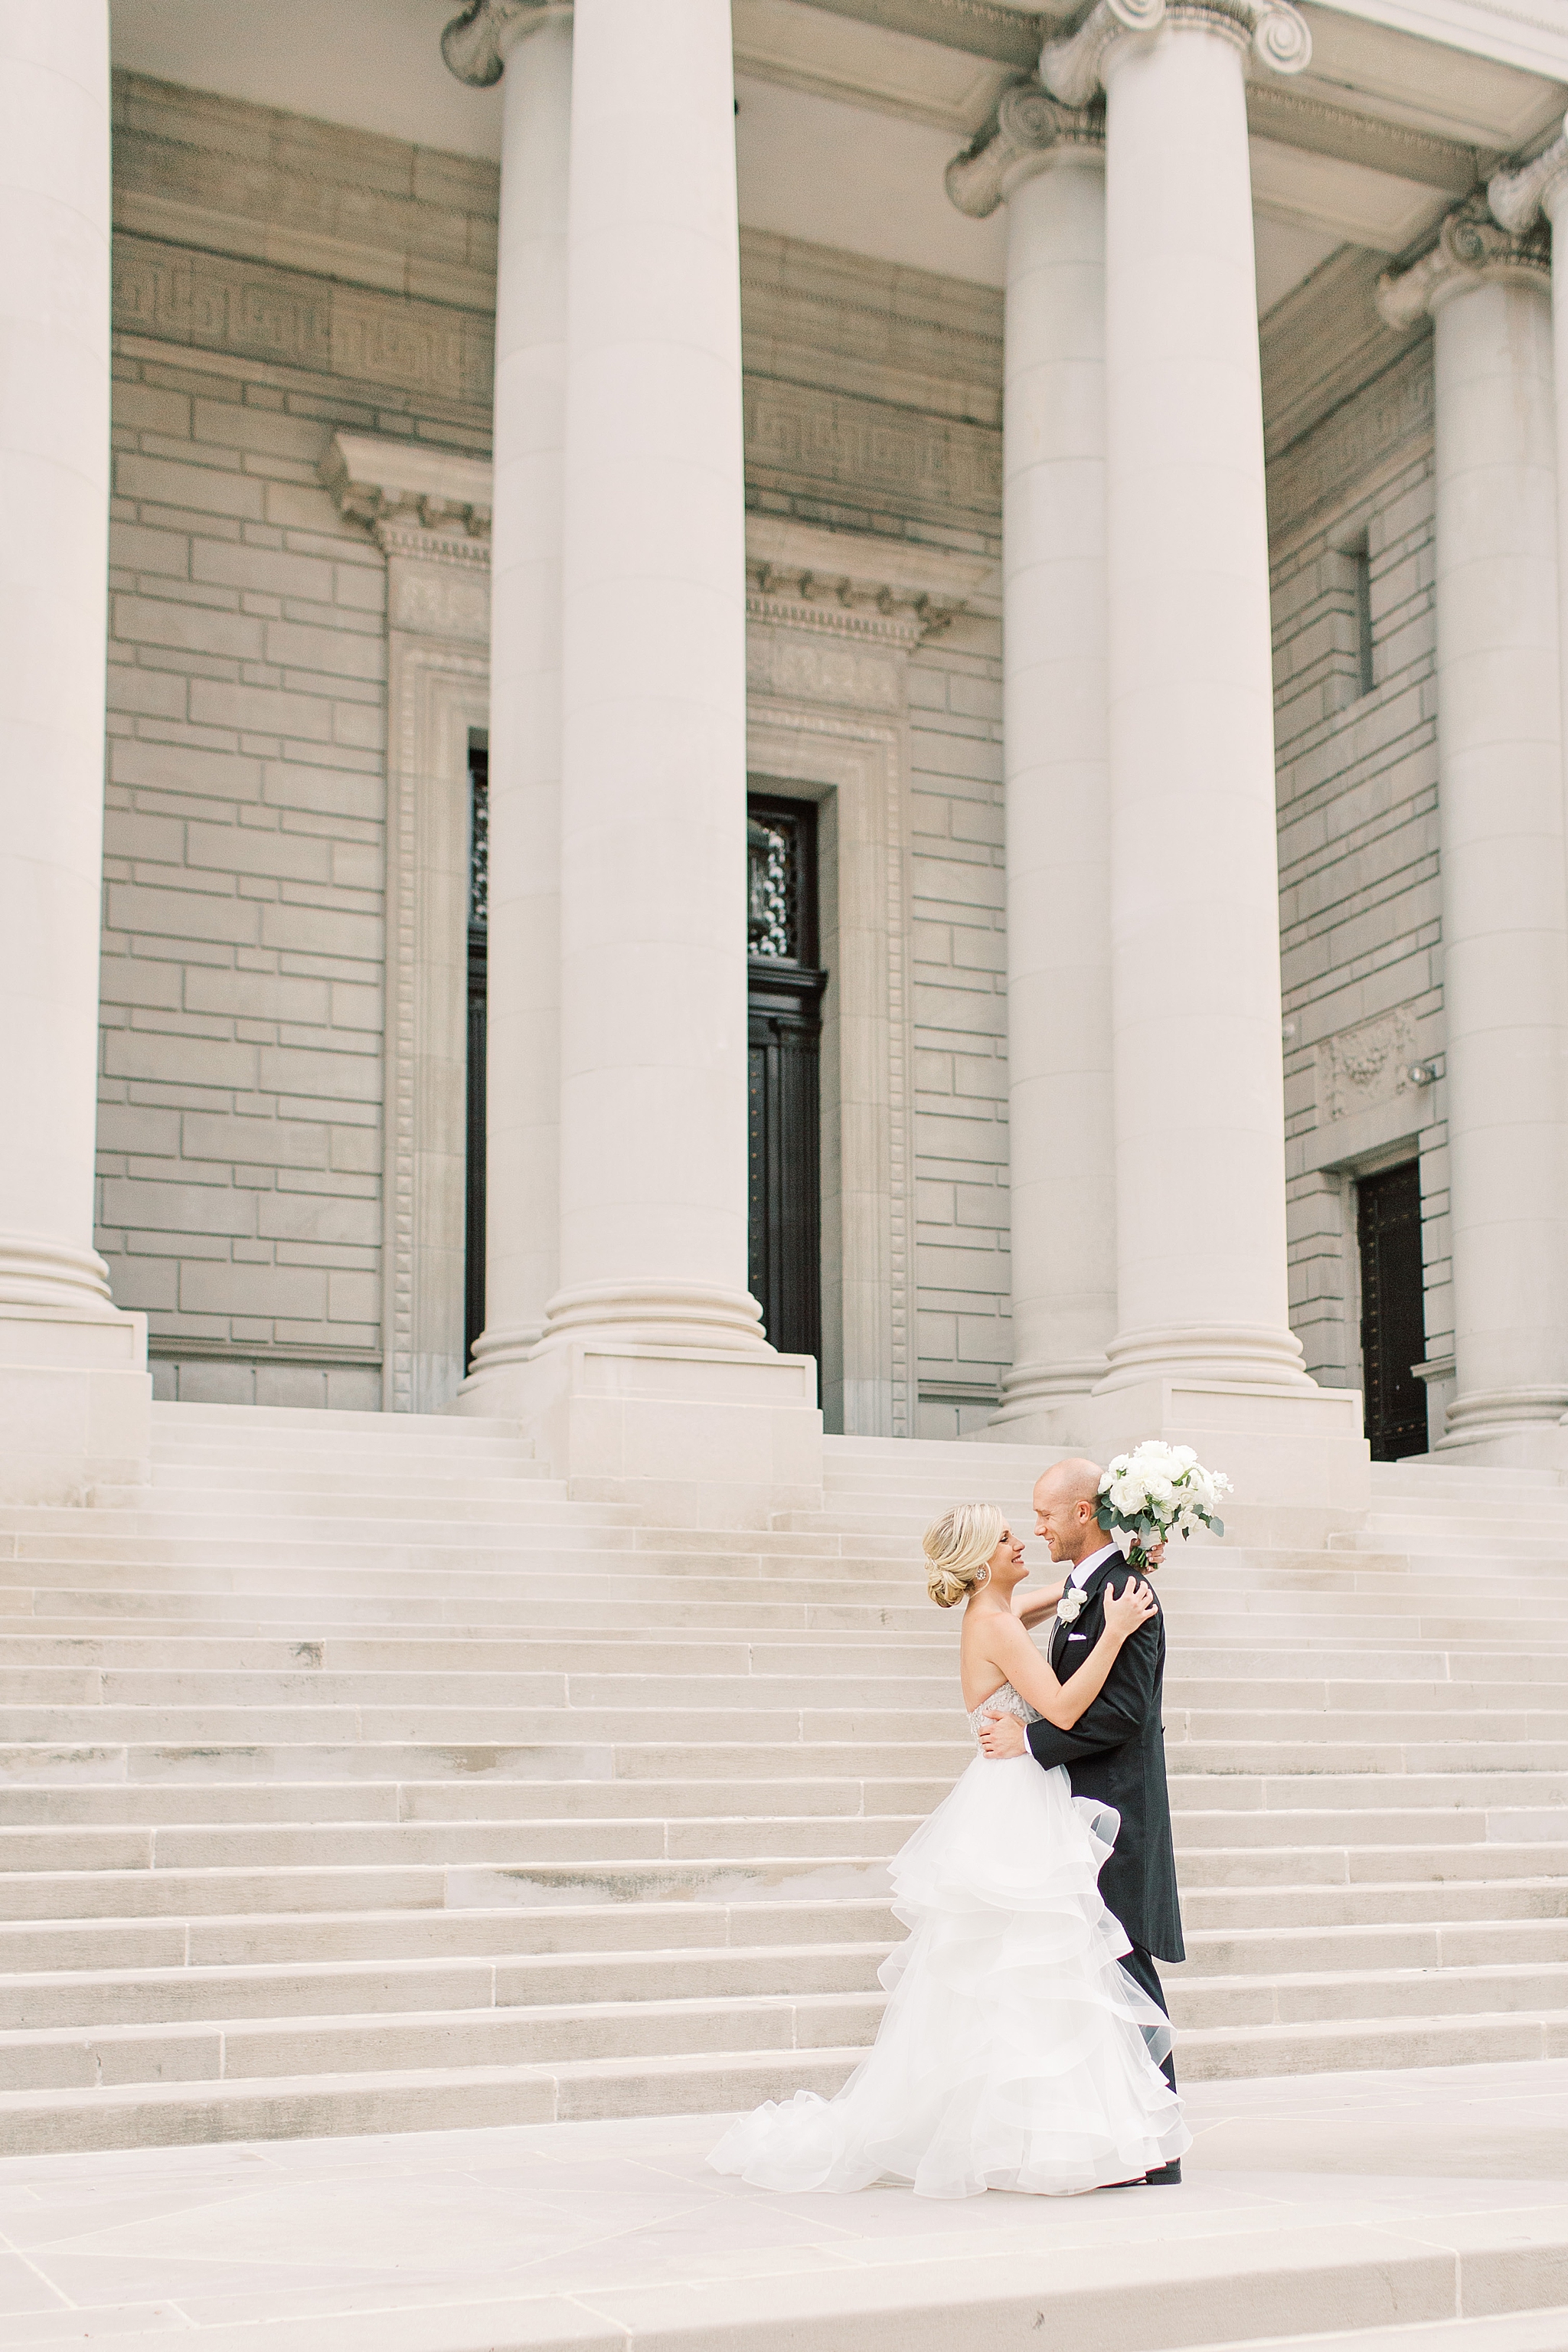 An elegant Carnegie Institution for Science wedding in Washington, DC photographed by Alicia Lacey Photography.